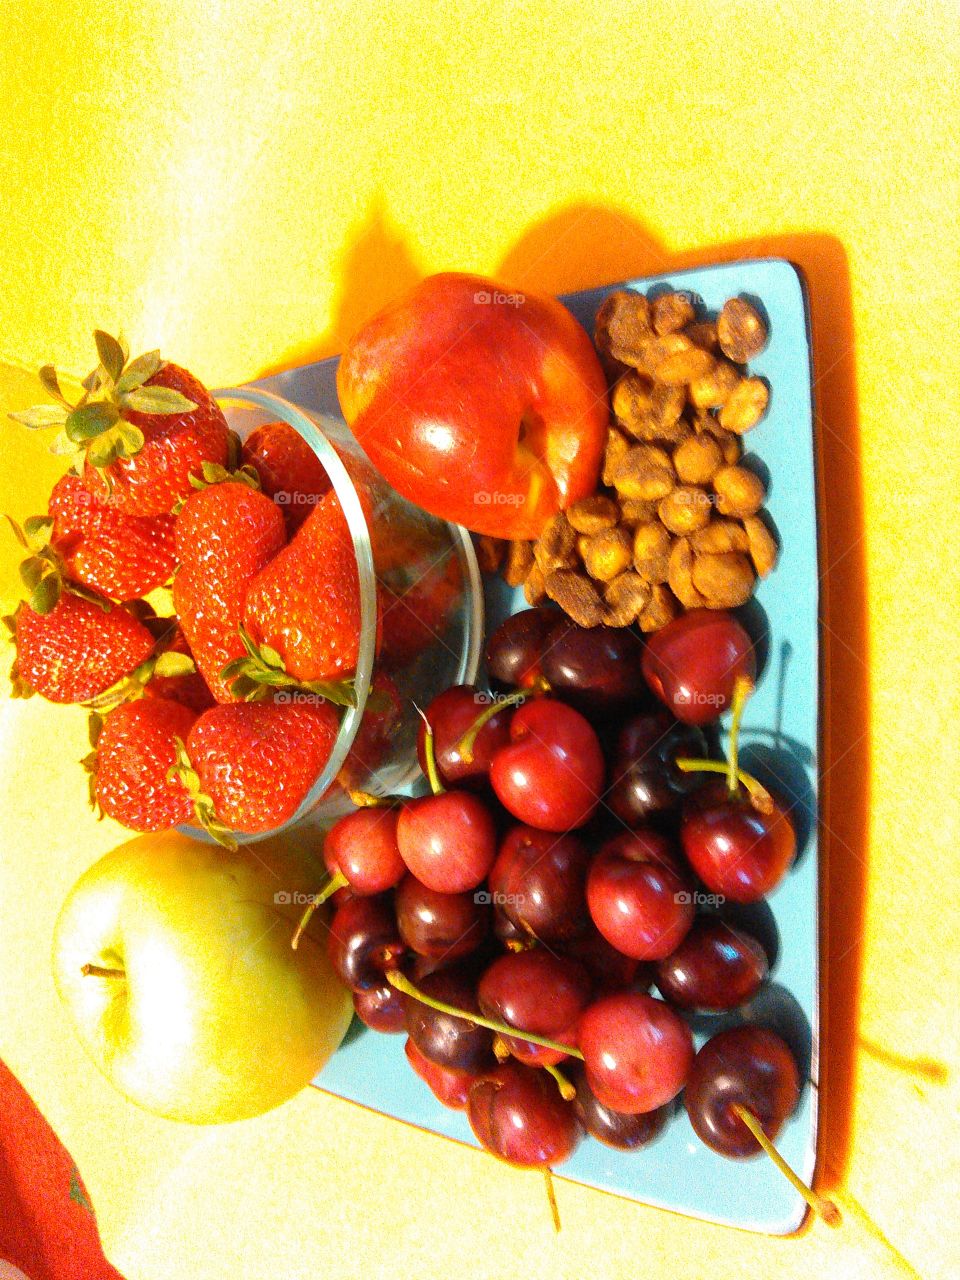 Healthy meal. Fruits and nuts